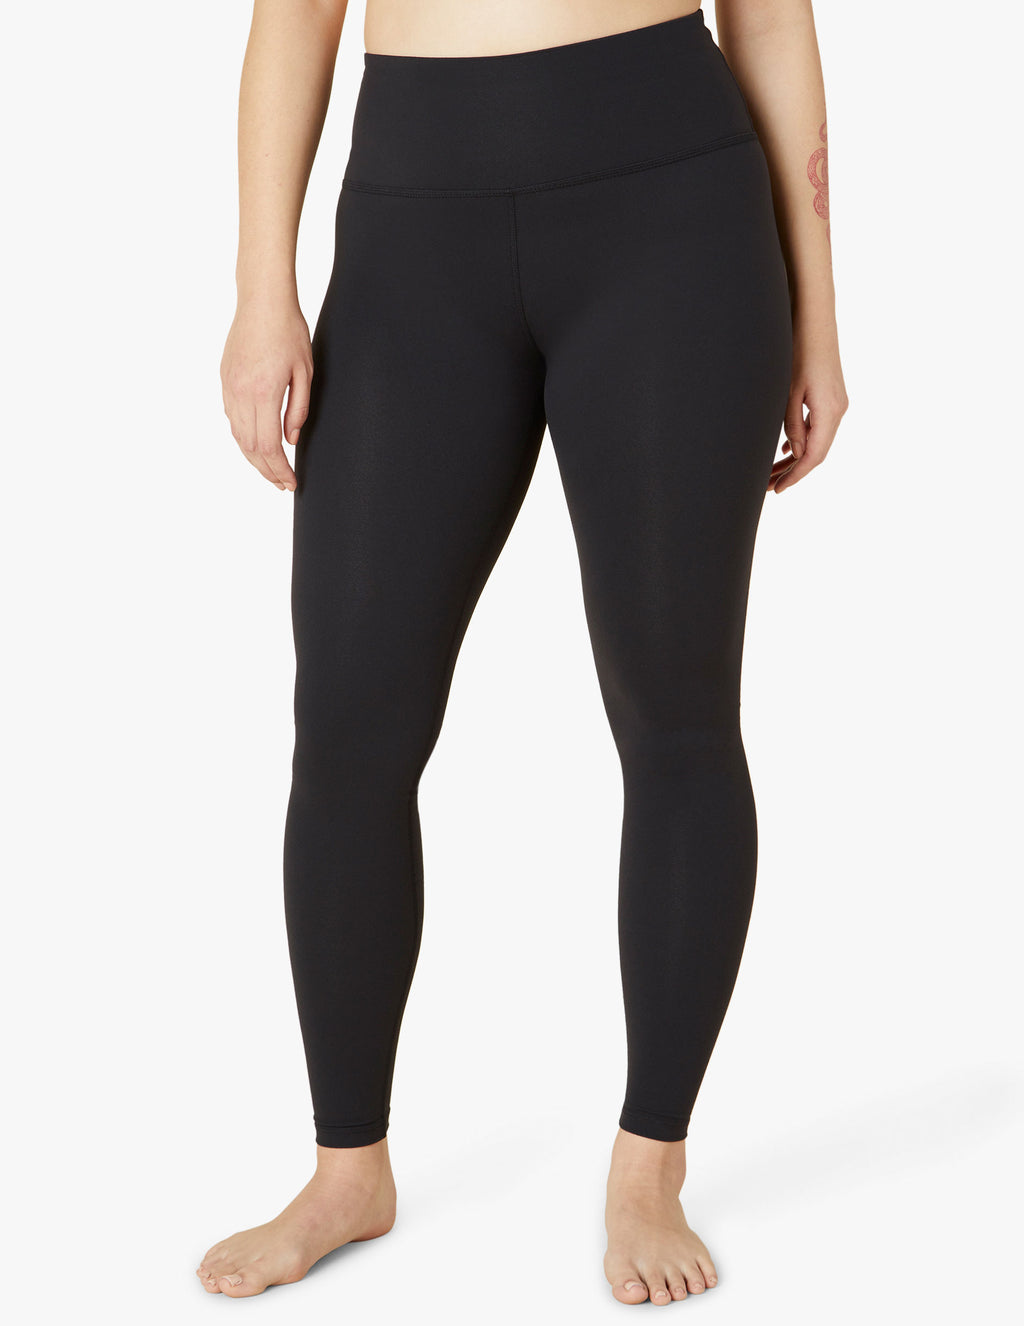 Supplex High waisted 7/8 Legging with Pockets - Sportsluxe tights